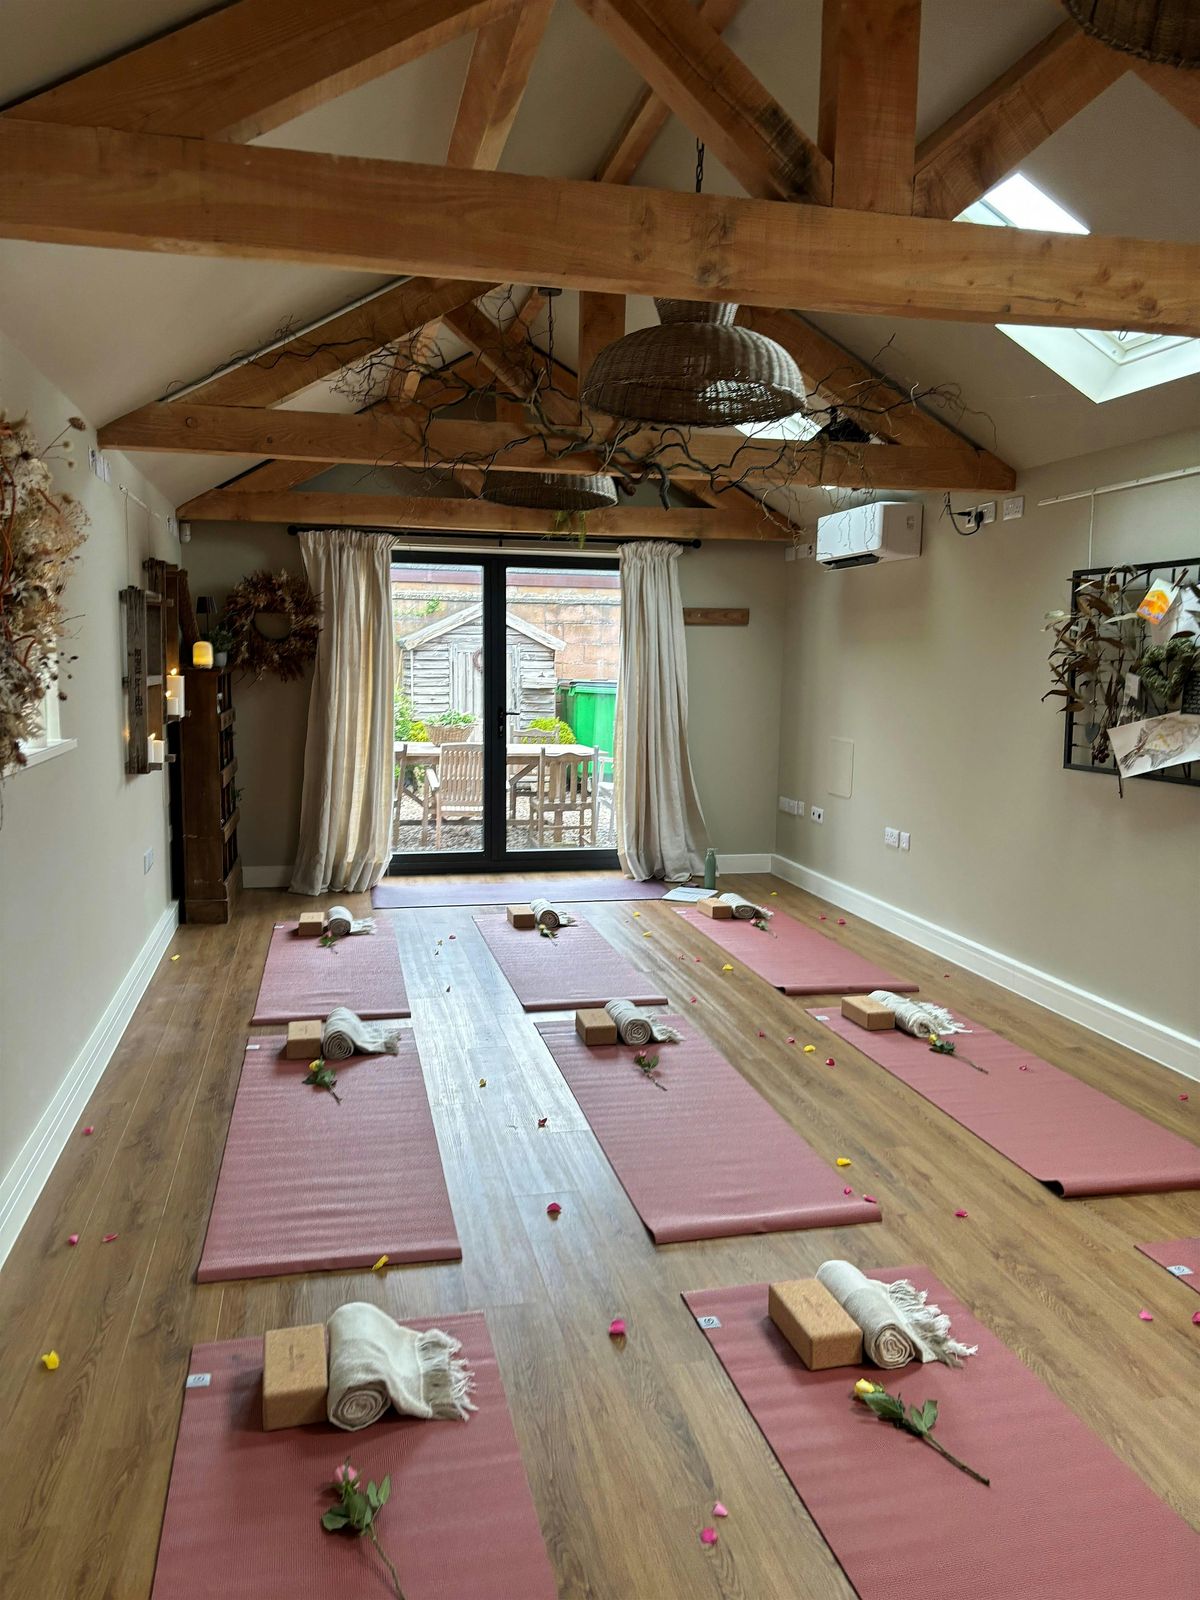 Yoga for Lower Body at The Walled Garden Workshop